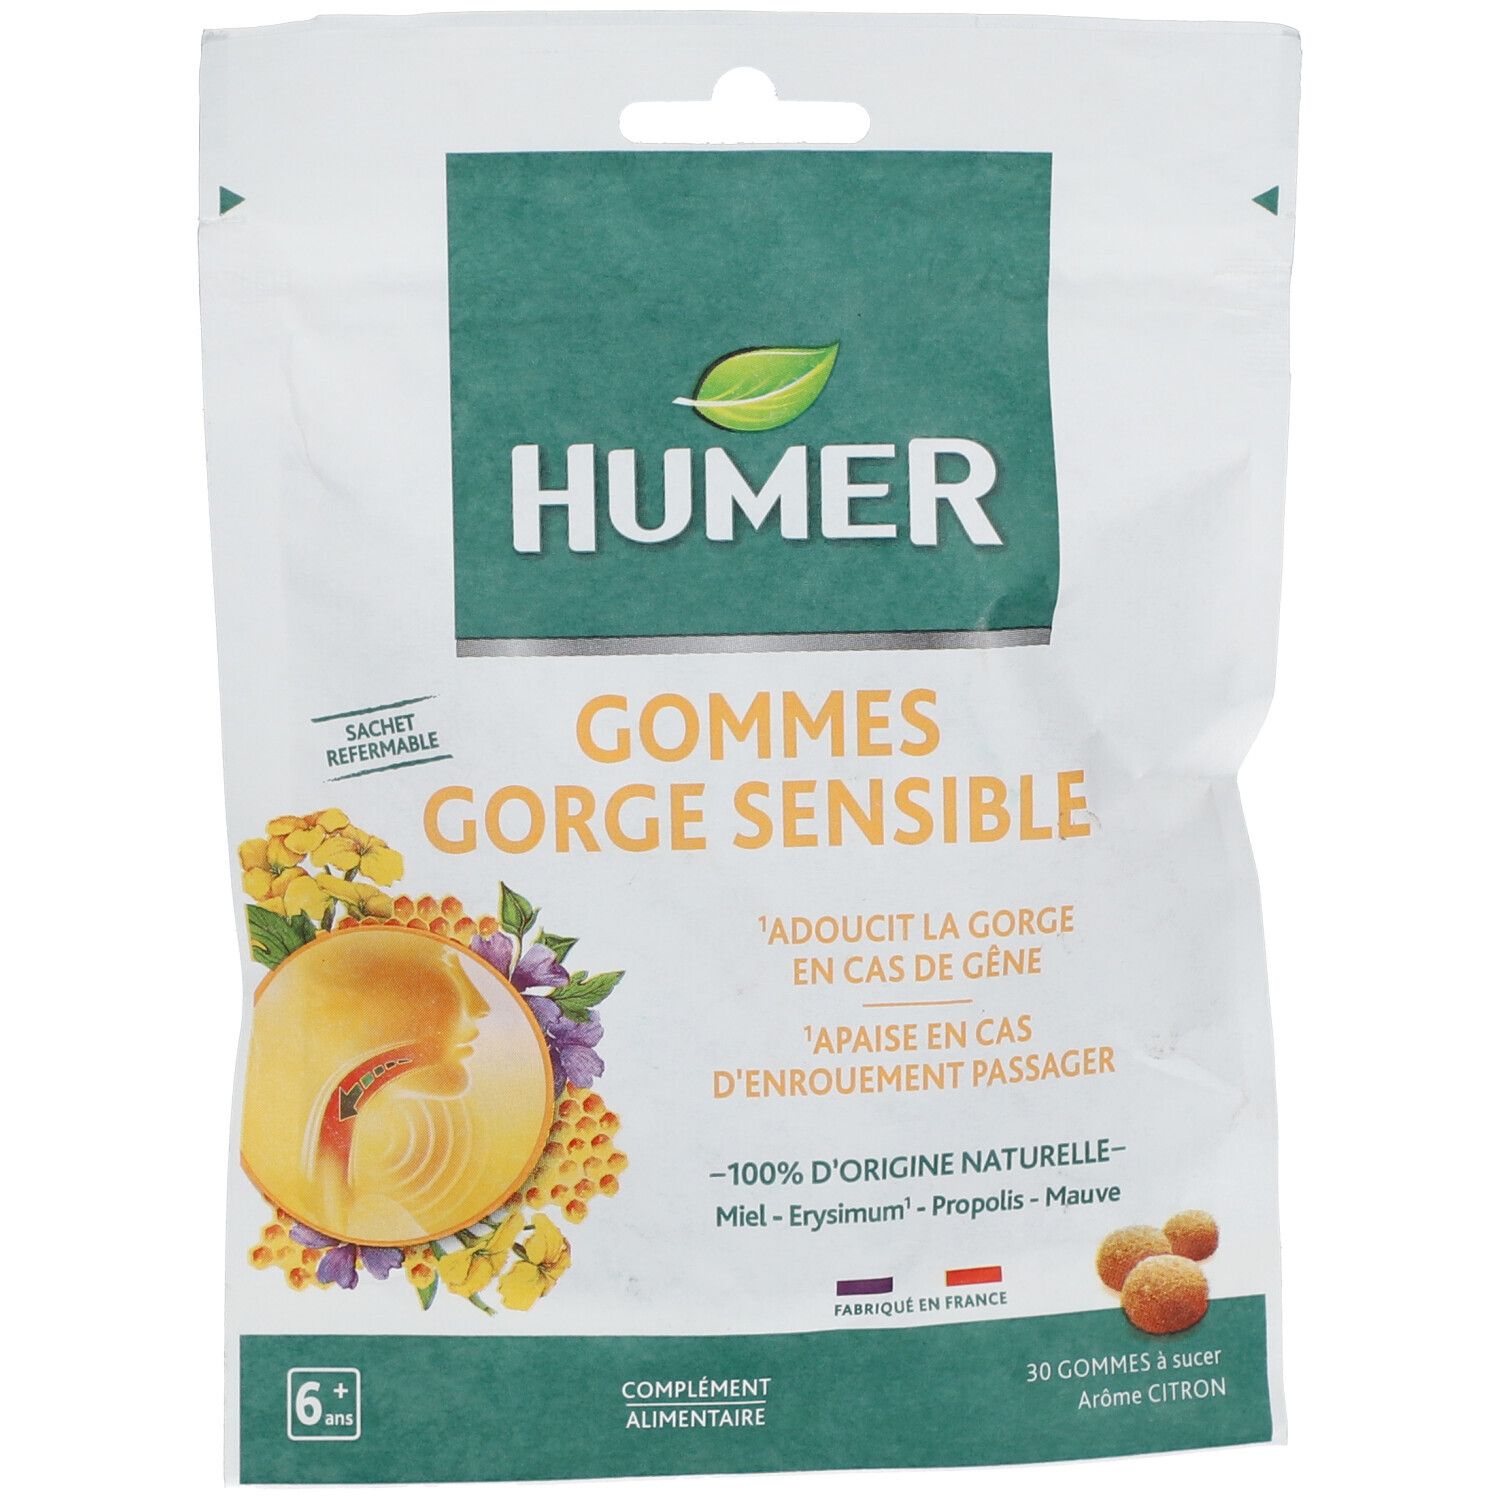 Humer Gommes gorge sensible